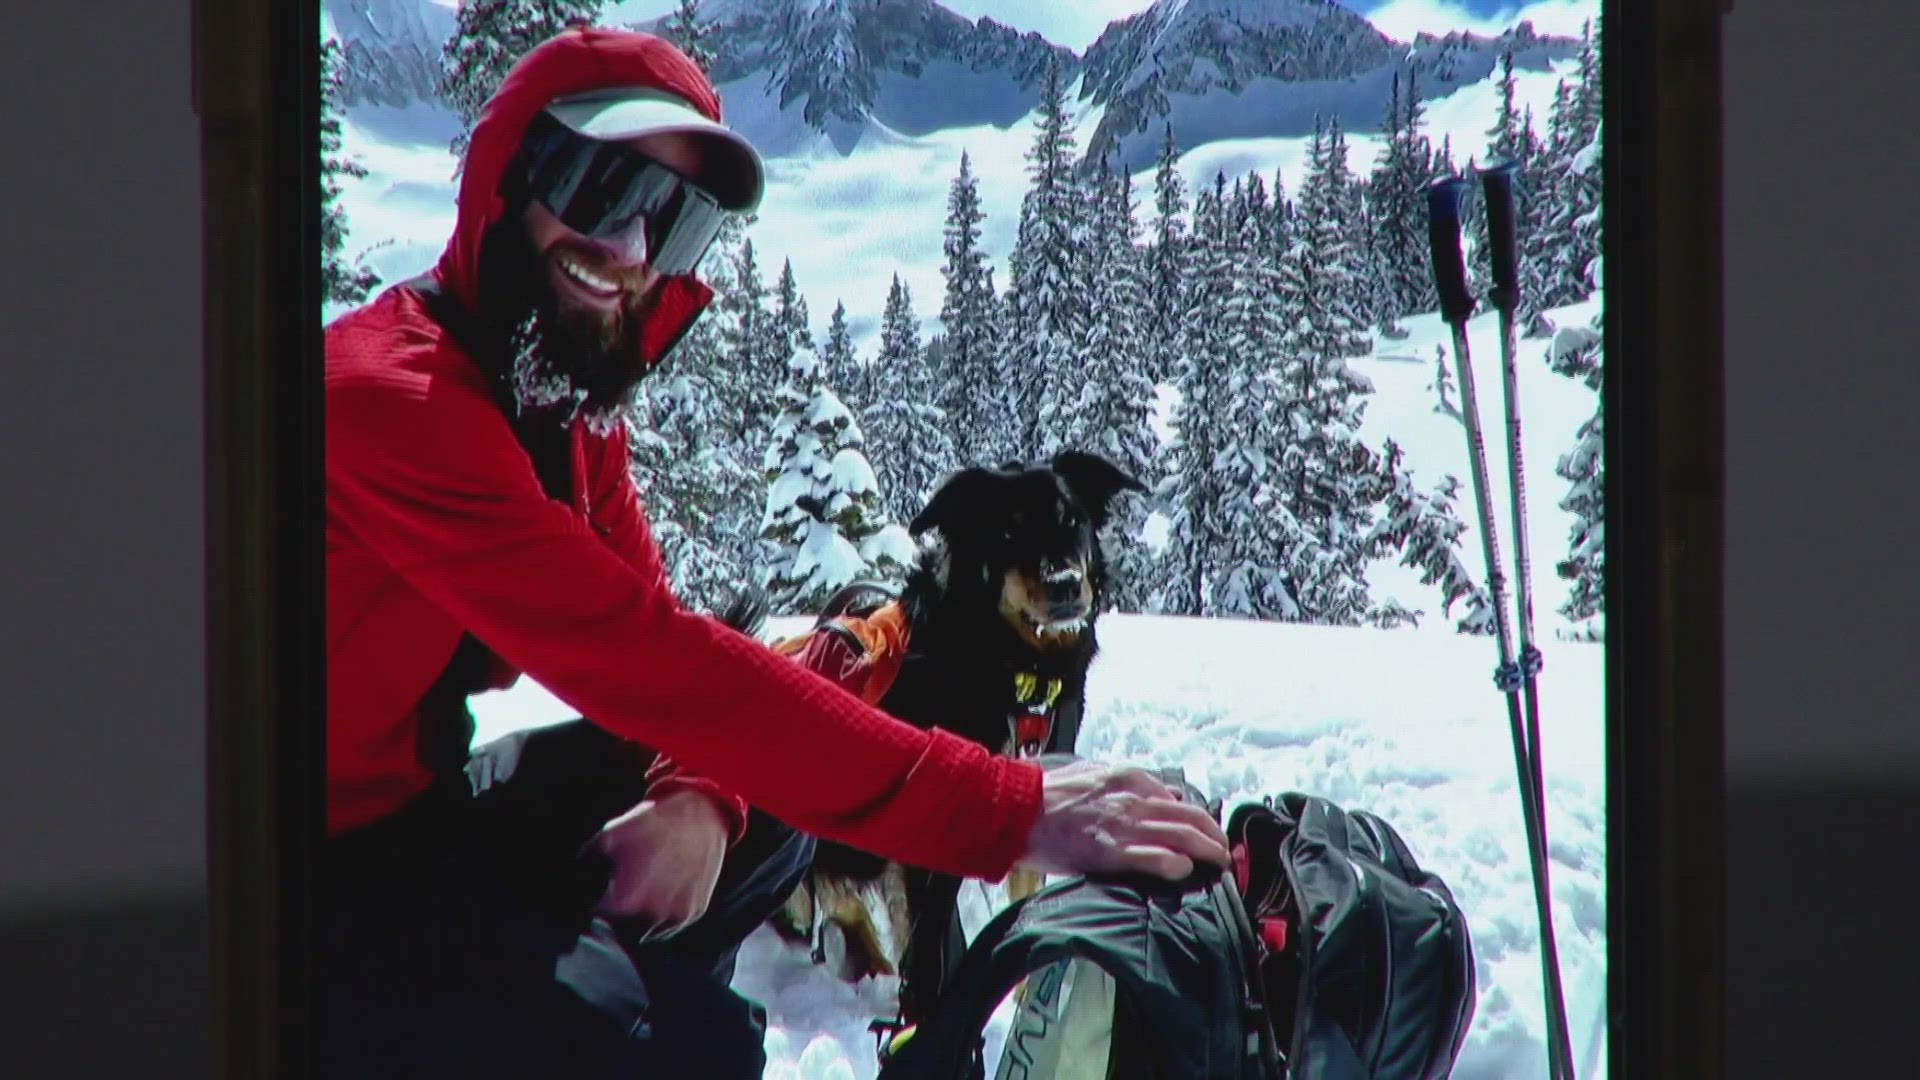 Jacob Dalbey was skiing with 2 of his friends and his dog Ullr when they were caught in a slide in Gunnison County. Dalbey believes his dog survived the avalanche.